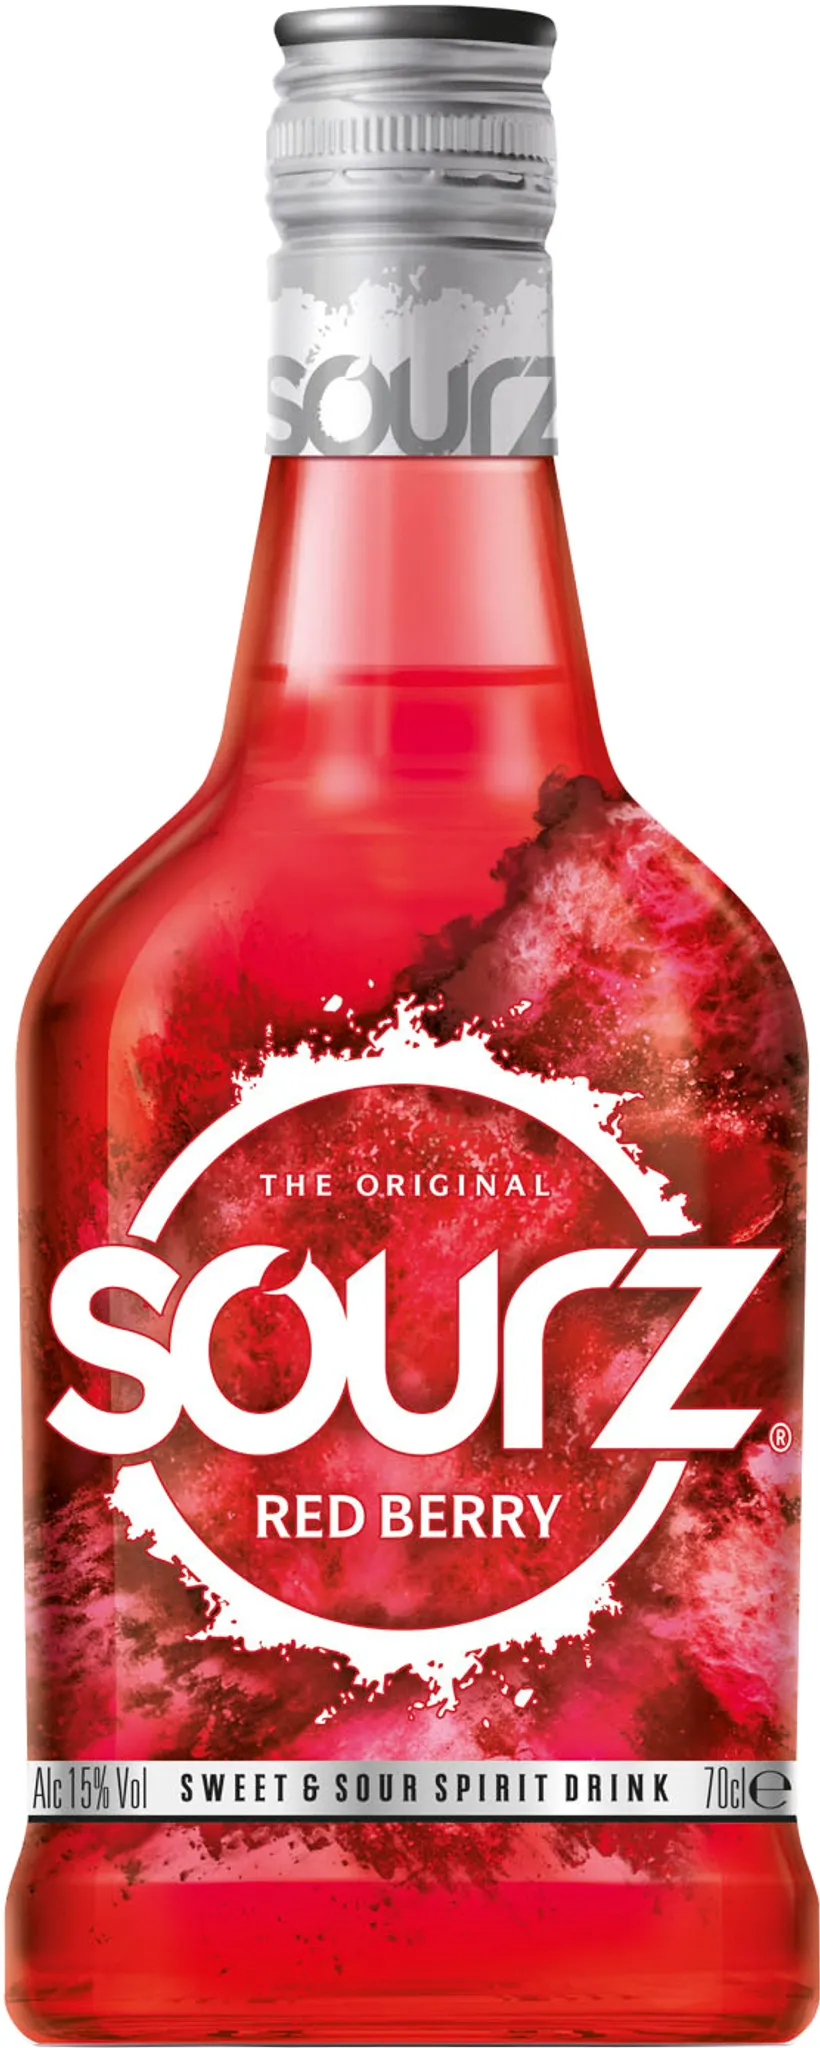 Sour Original Sourz and Berry Red The Sweet